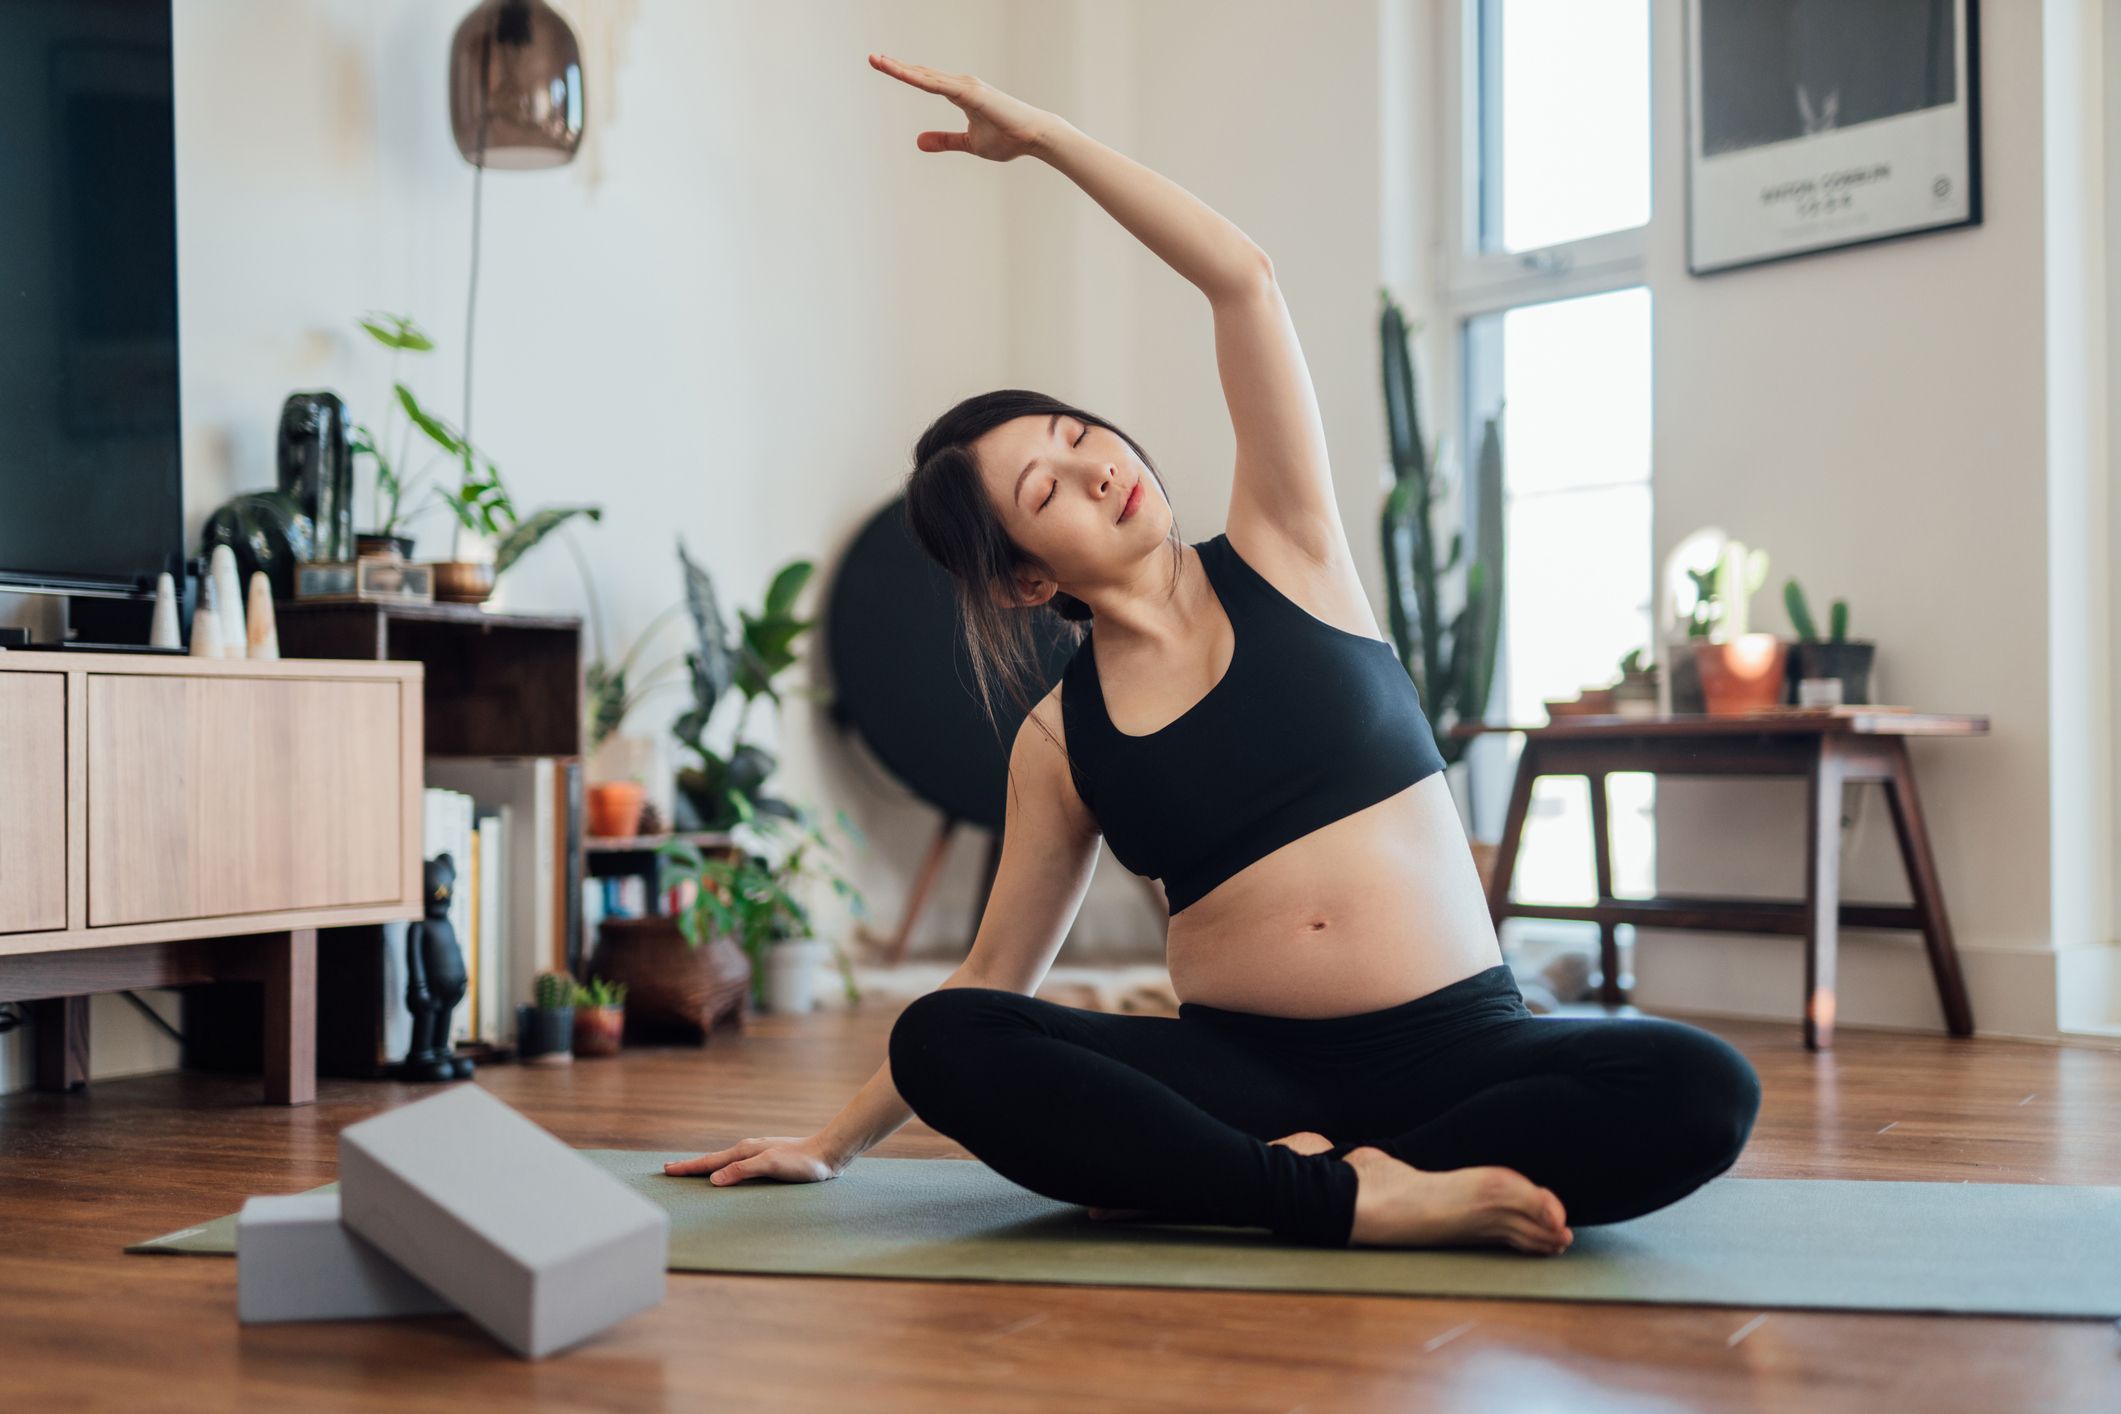 Best yoga gadgets that you can use to improve your mindfulness